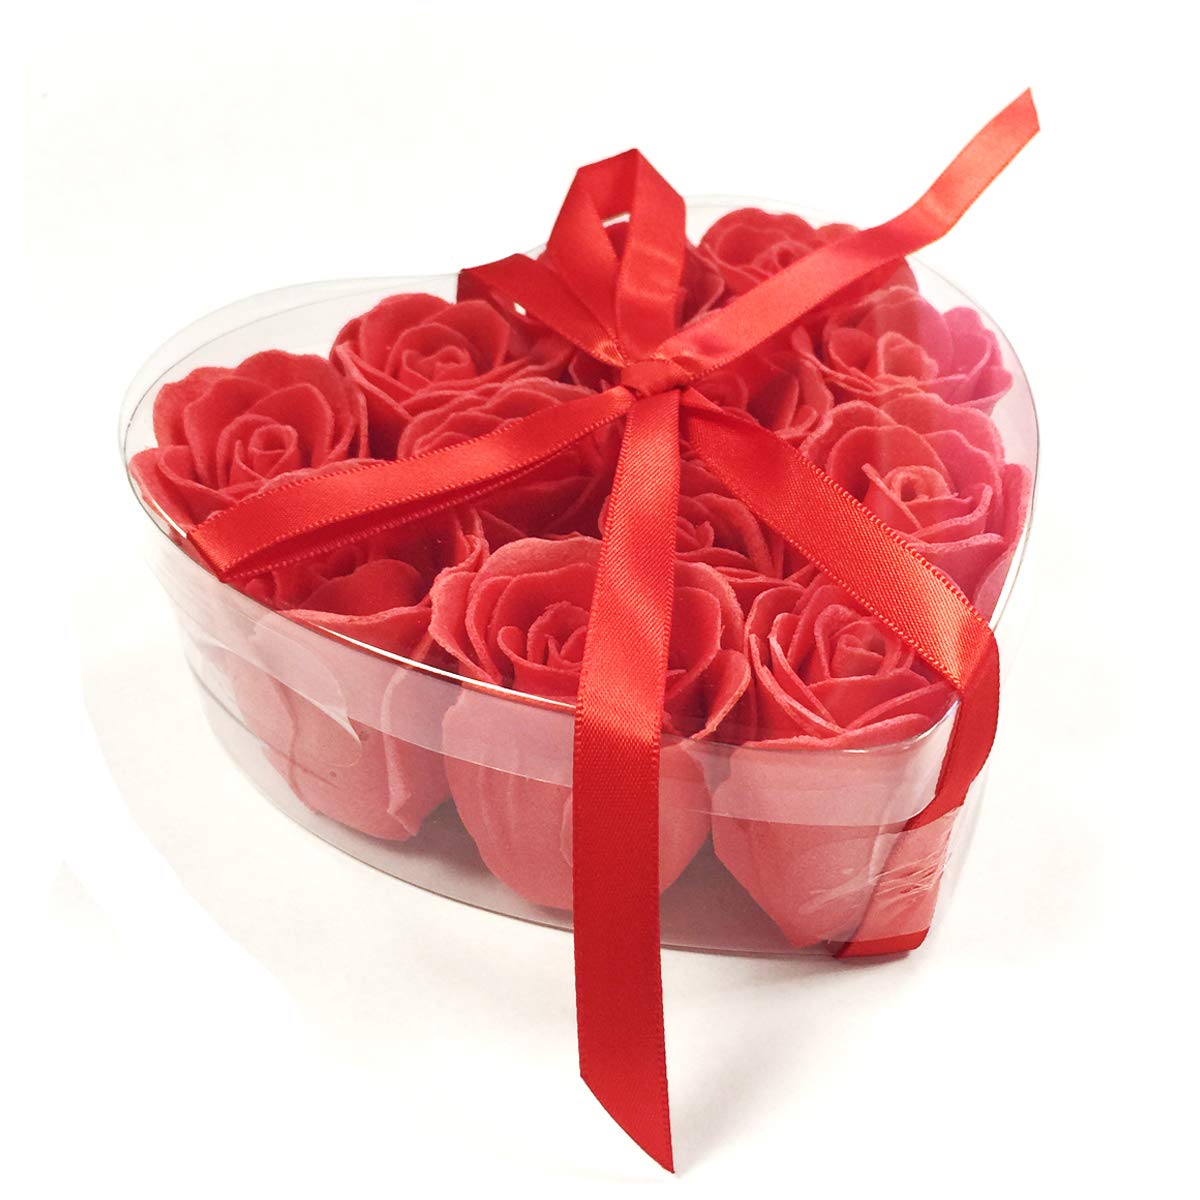 Wrapables Scented Rose Soaps (Set of 12), Red